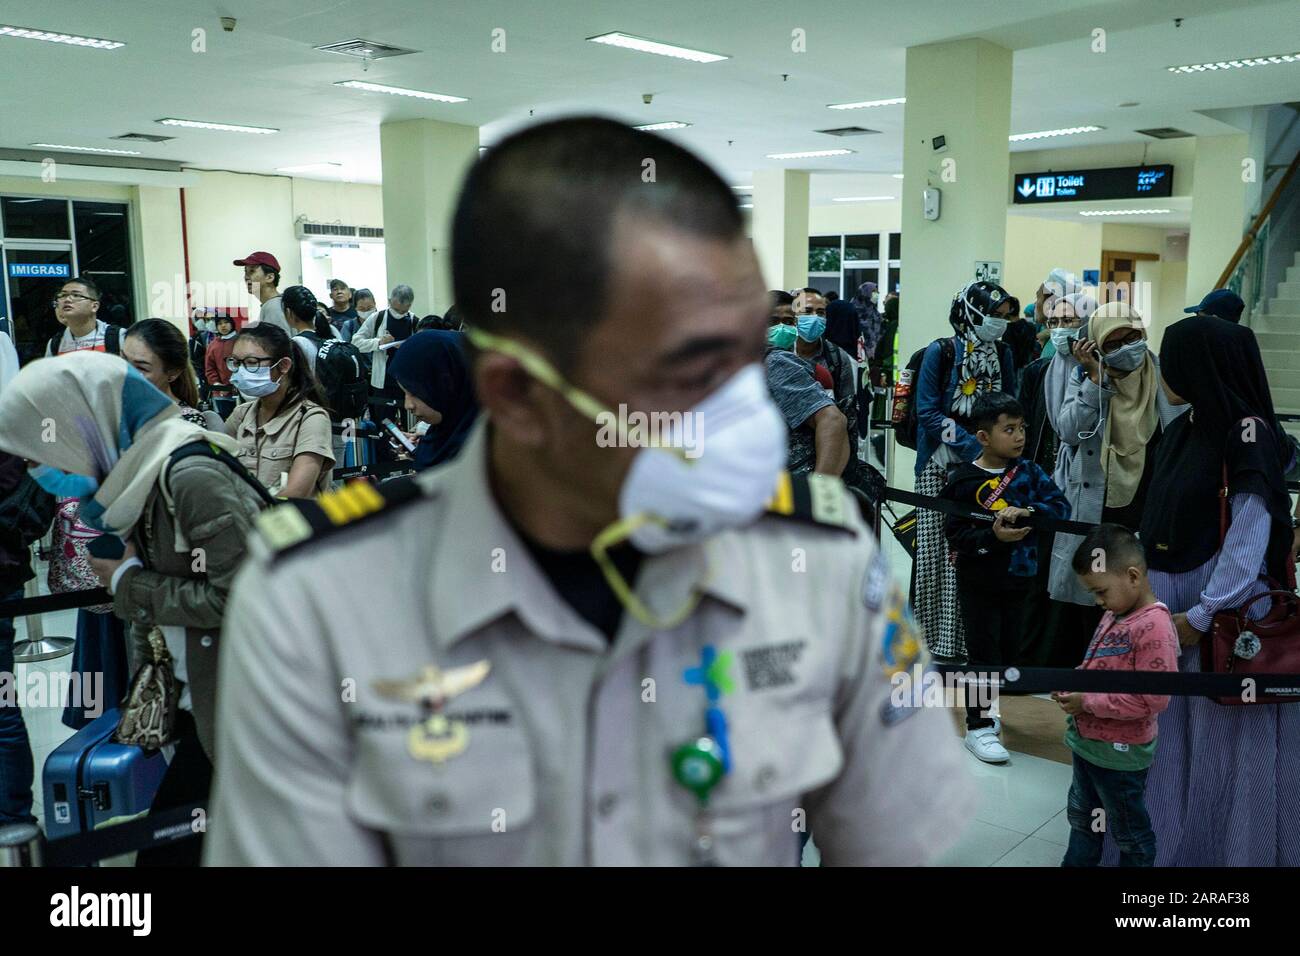 Passengers wear masks on the arrival at the Sultan Iskandar Muda International Airport in Aceh Besar Regency.Indonesian government announced it was officially stopping flights to Wuhan China, a deadly new virus center, and health checks at airports in Indonesia were tightened. Stock Photo